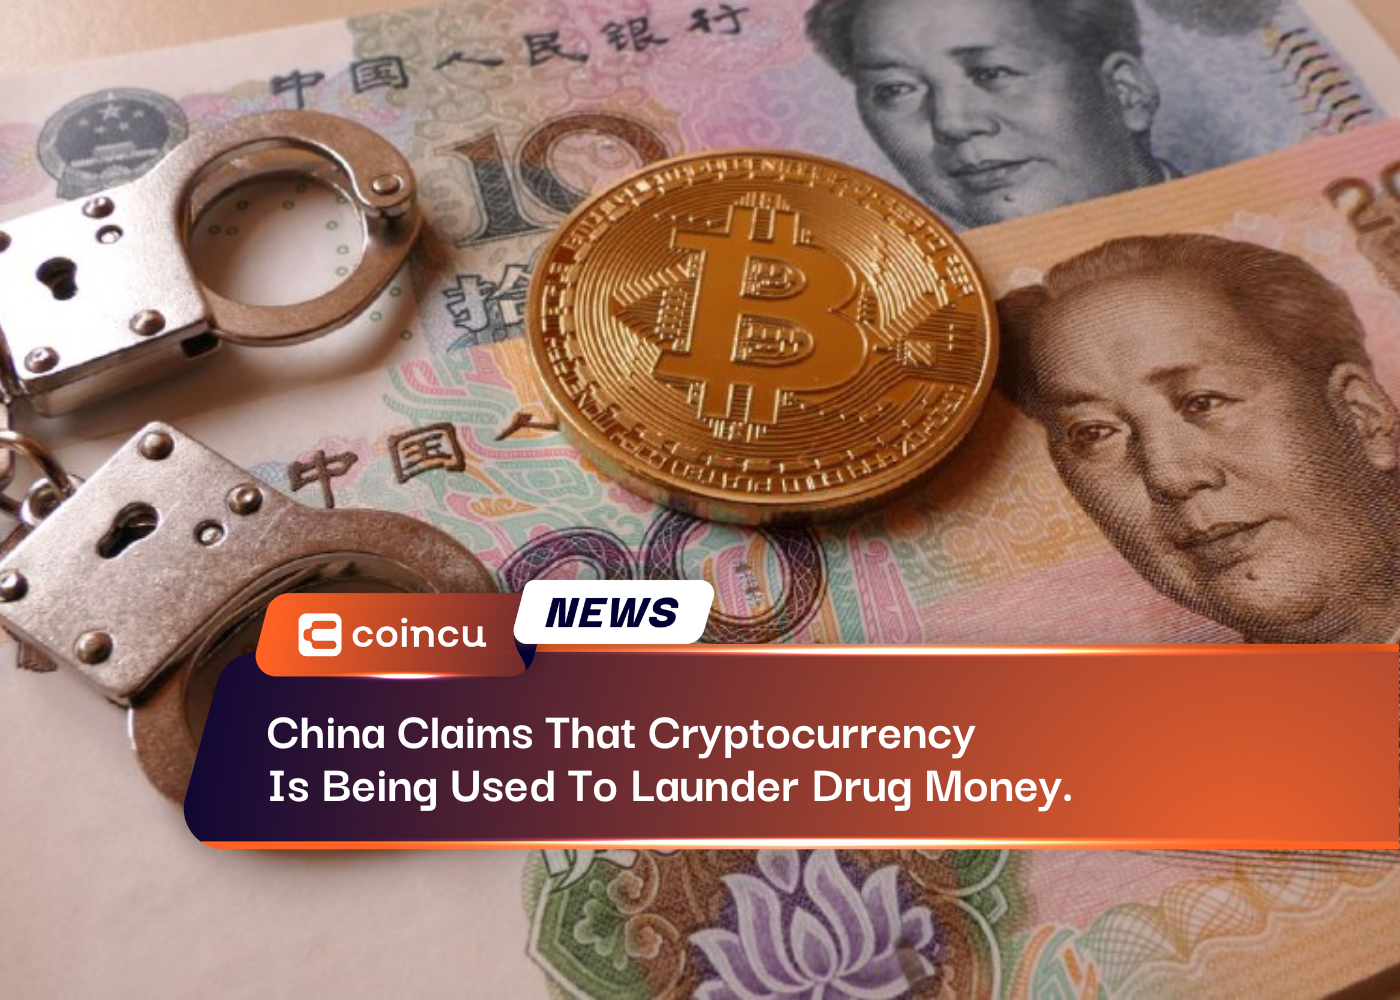 China Claims That Cryptocurrency Is Being Used To Launder Drug Money.China Claims That Cryptocurrency Is Being Used To Launder Drug Money.